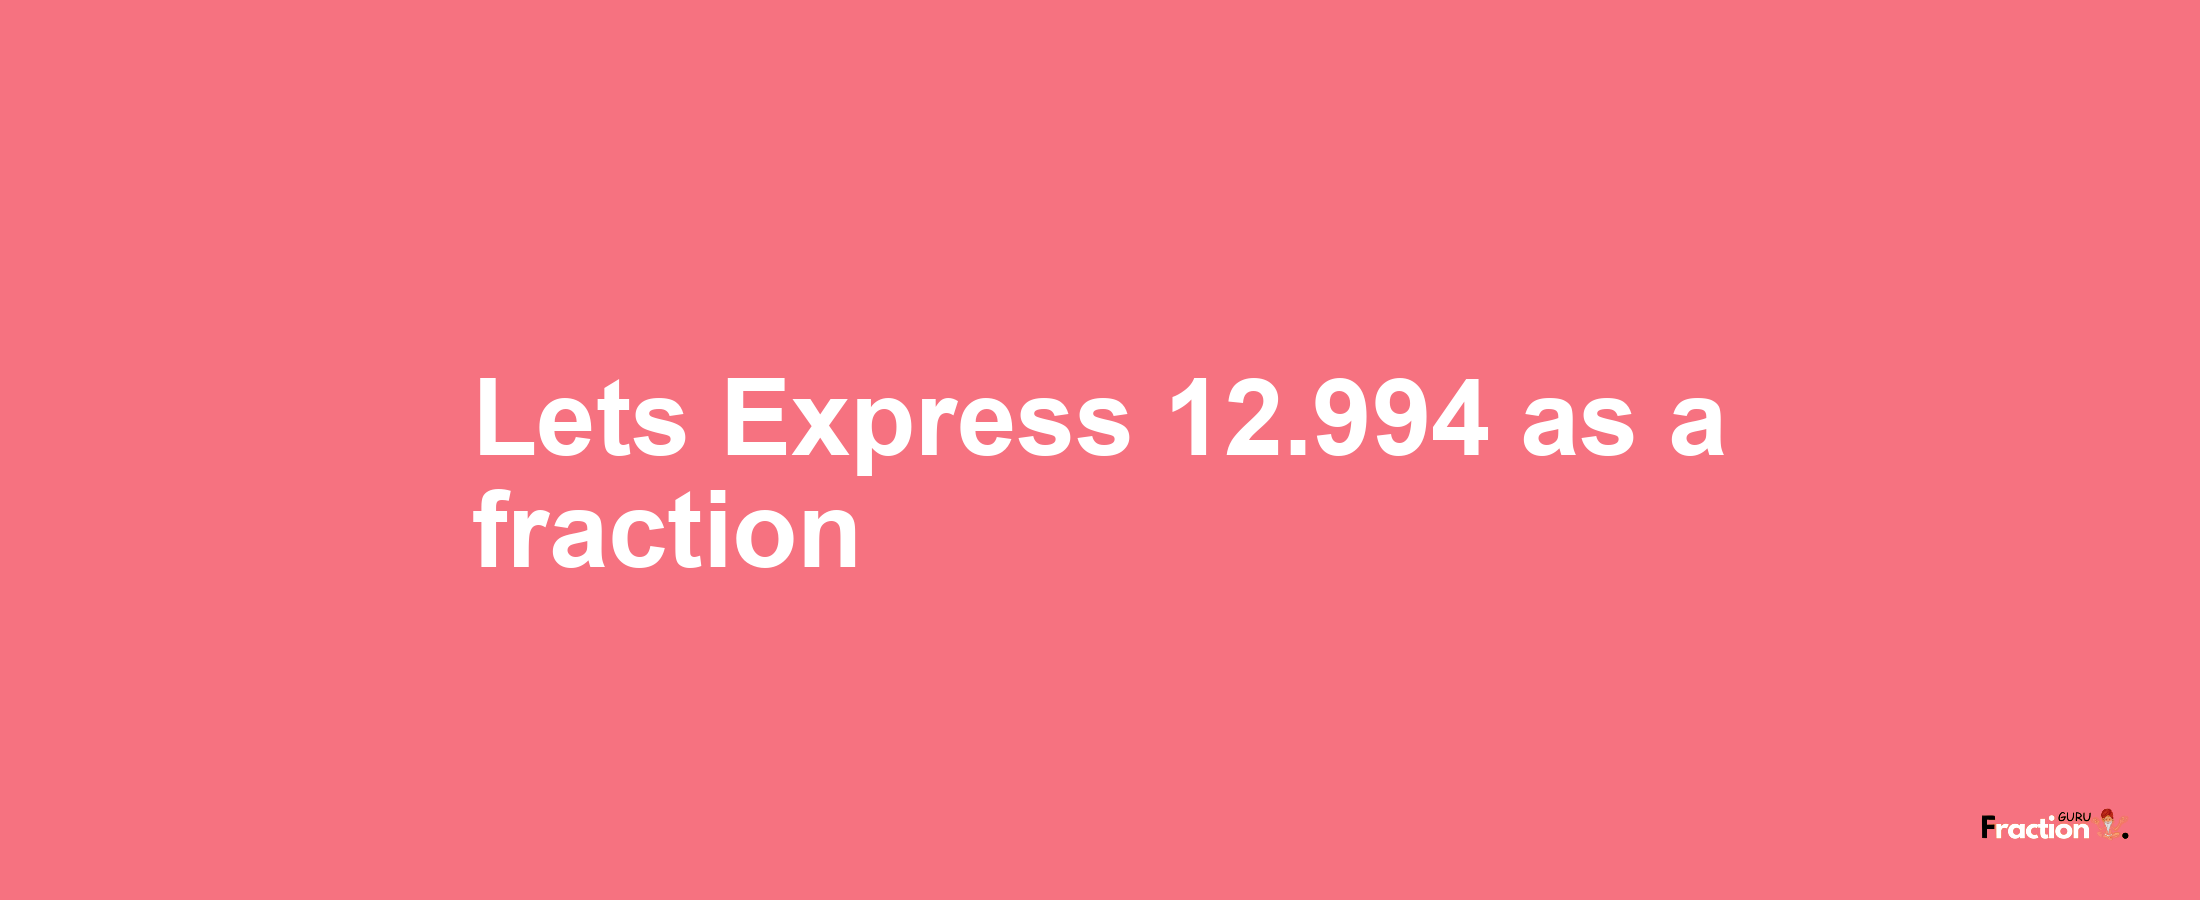 Lets Express 12.994 as afraction